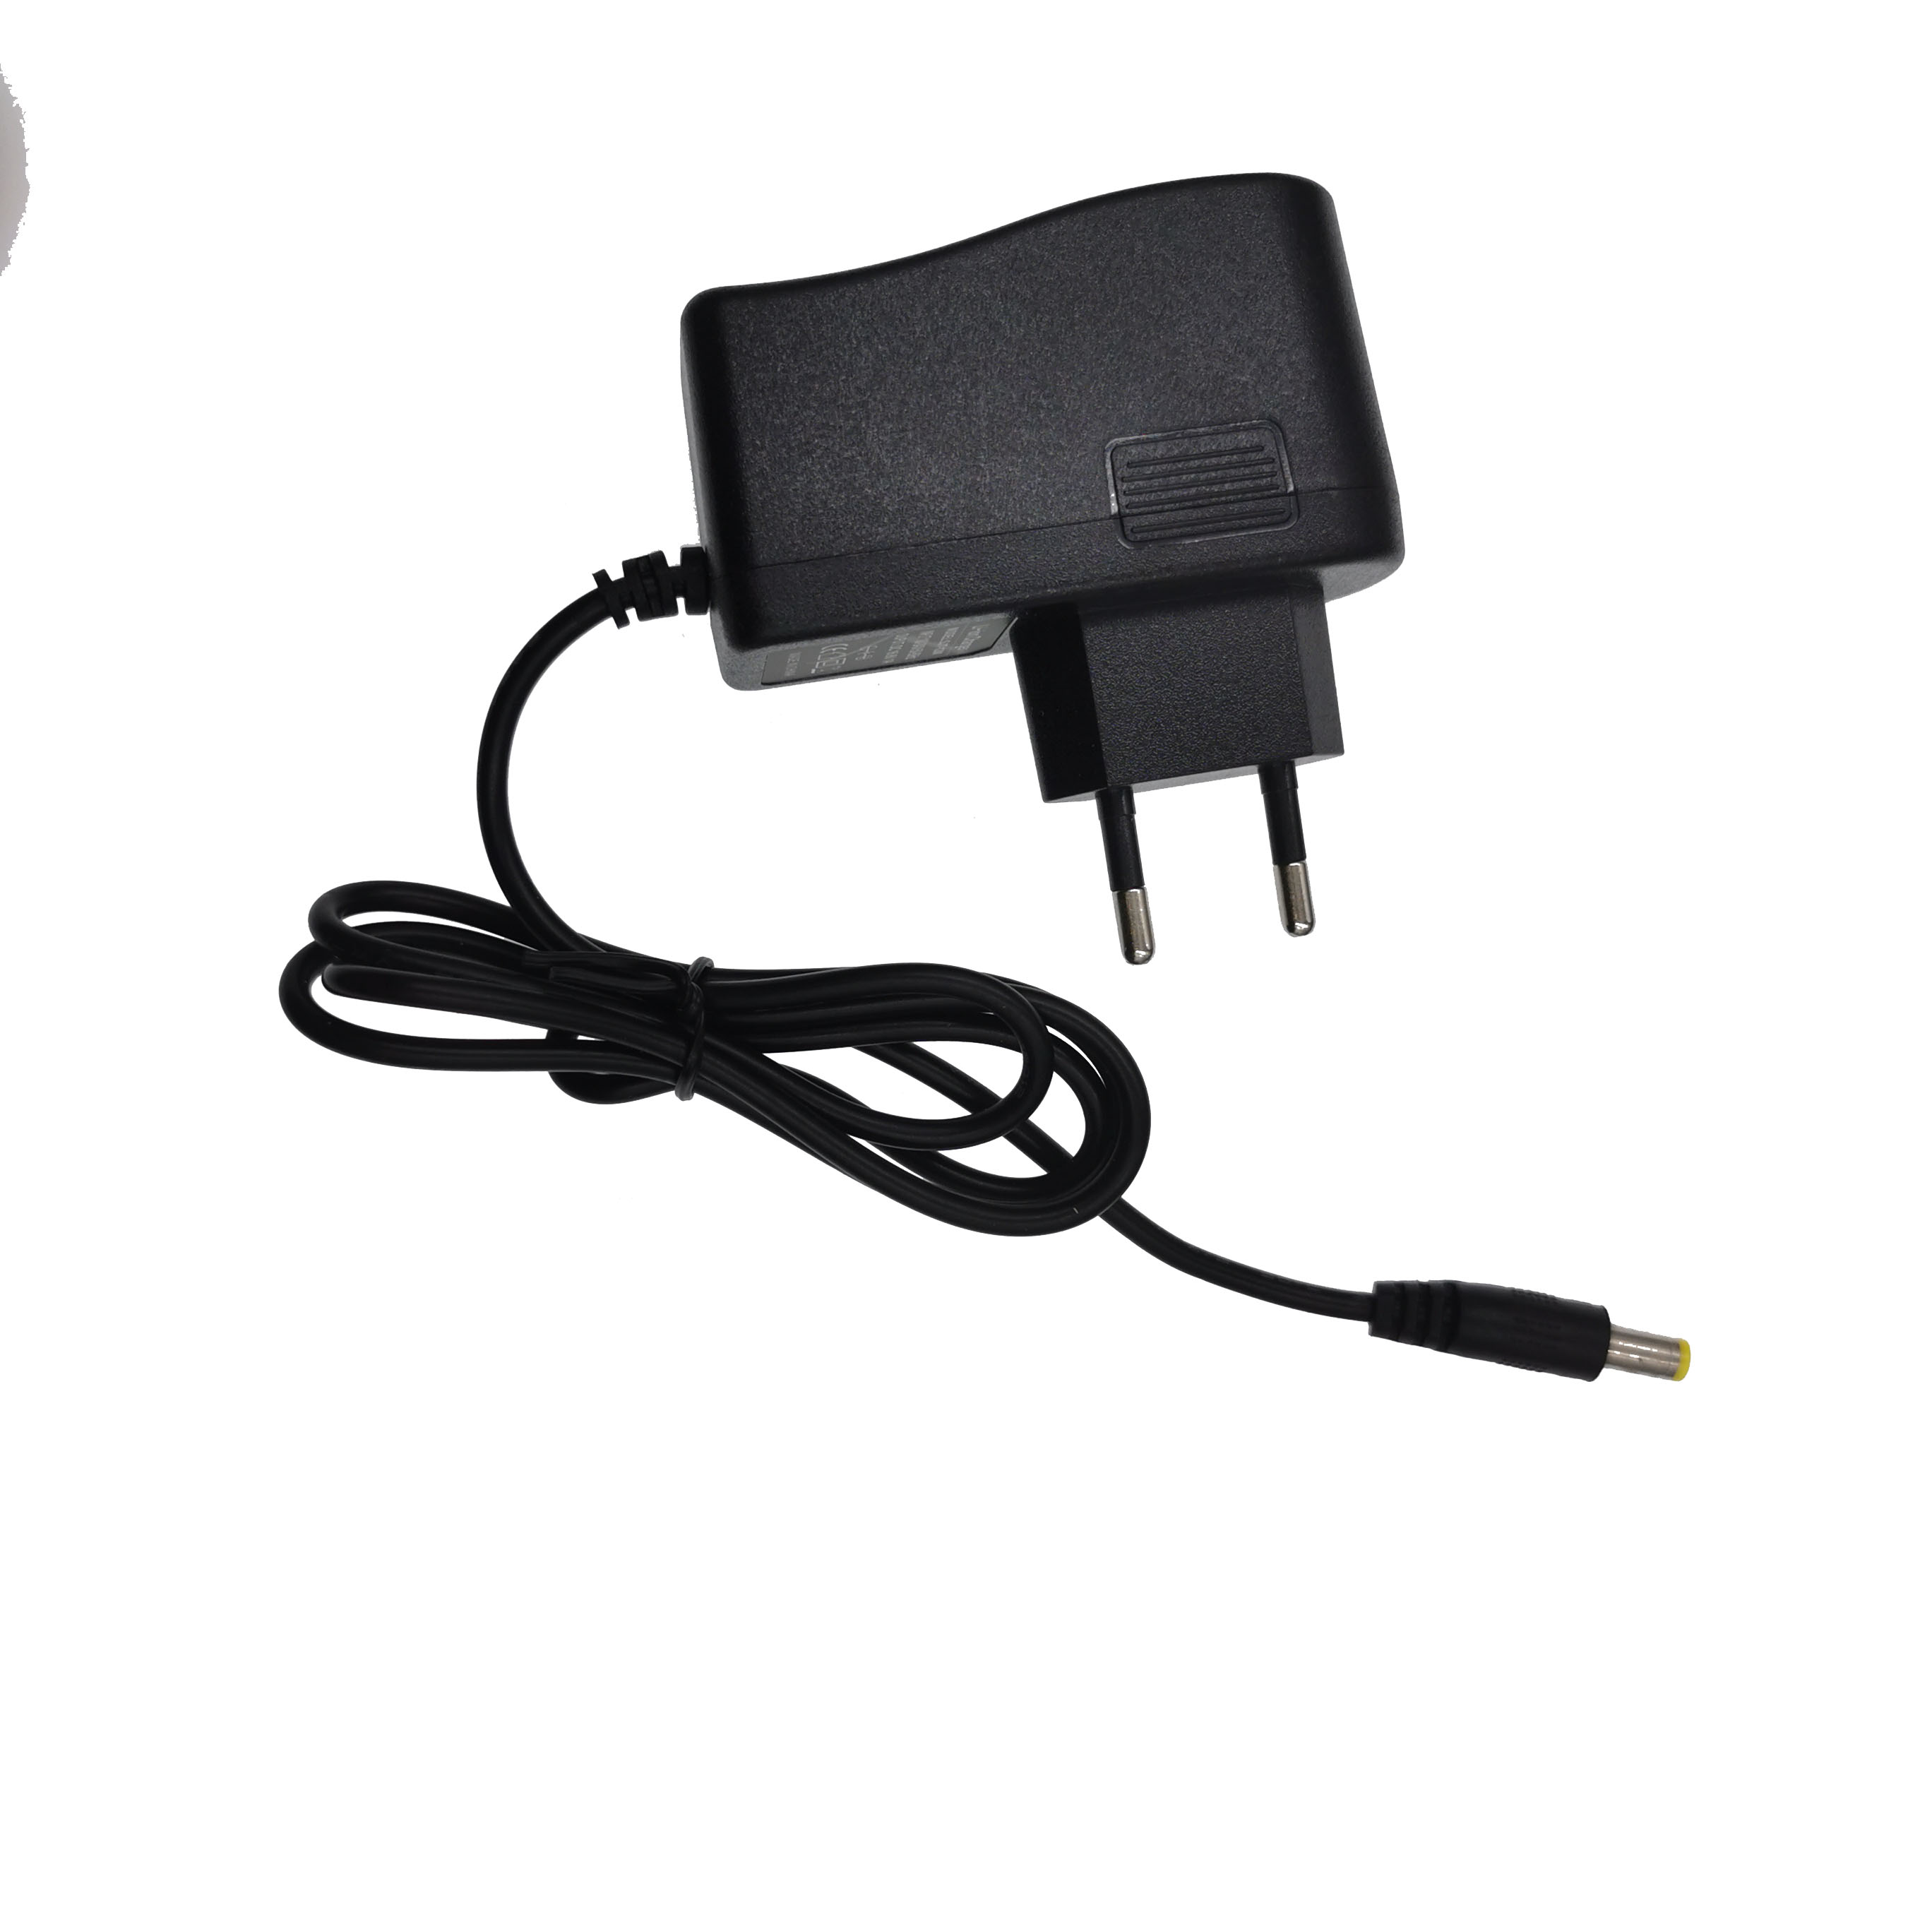 16.8V 1A Lithium li-ion Battery Charger for Screwdriver 14.4V 4Series 18650 Lithium Battery Wall Charger DC 5.5MM*2.1MM